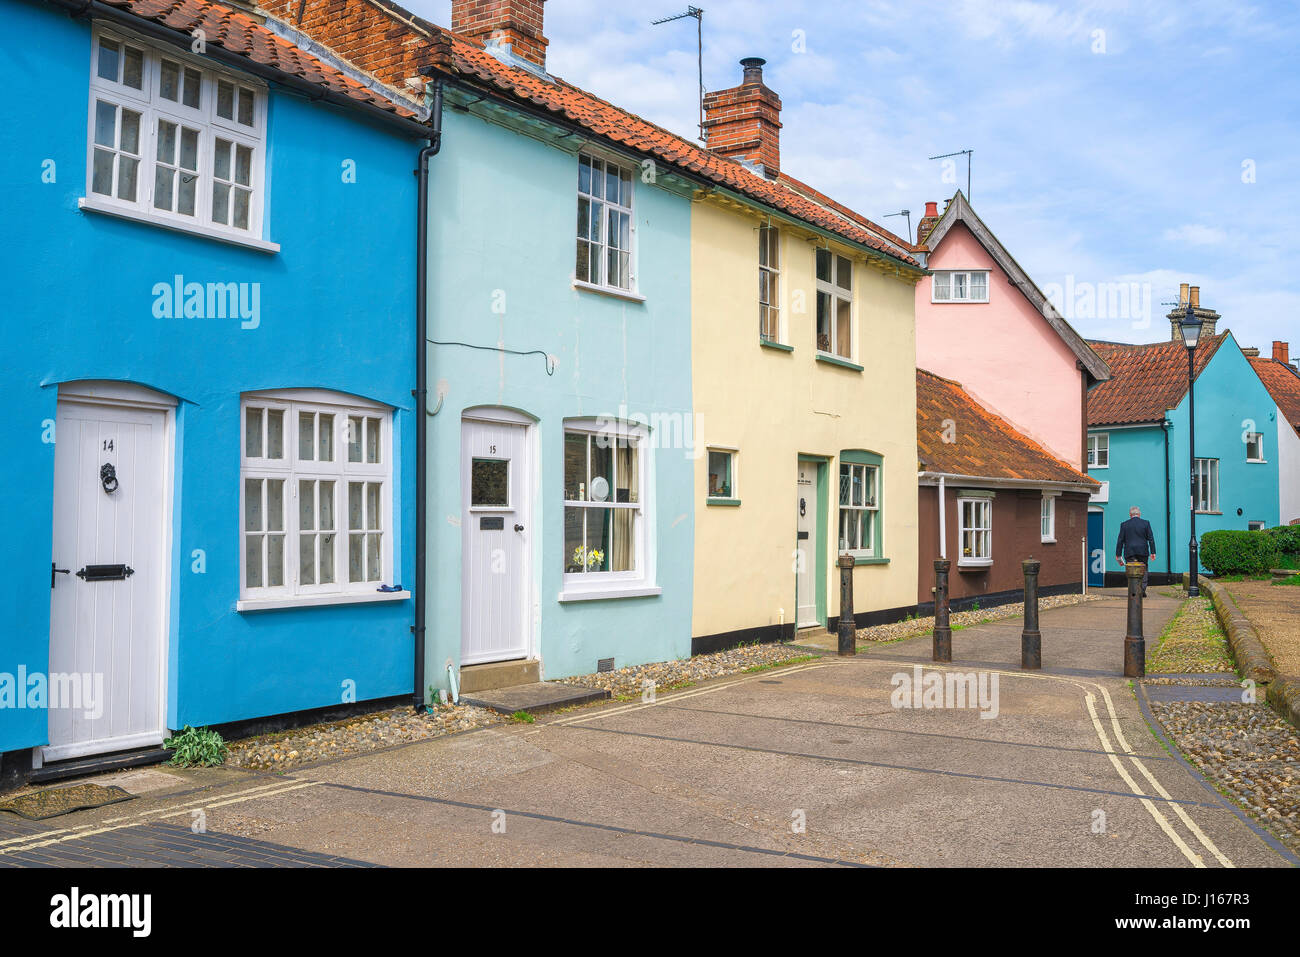 Halesworth Suffolk UK, colourful cottages in the centre of the rural Suffolk town of Halesworth, England UK Stock Photo